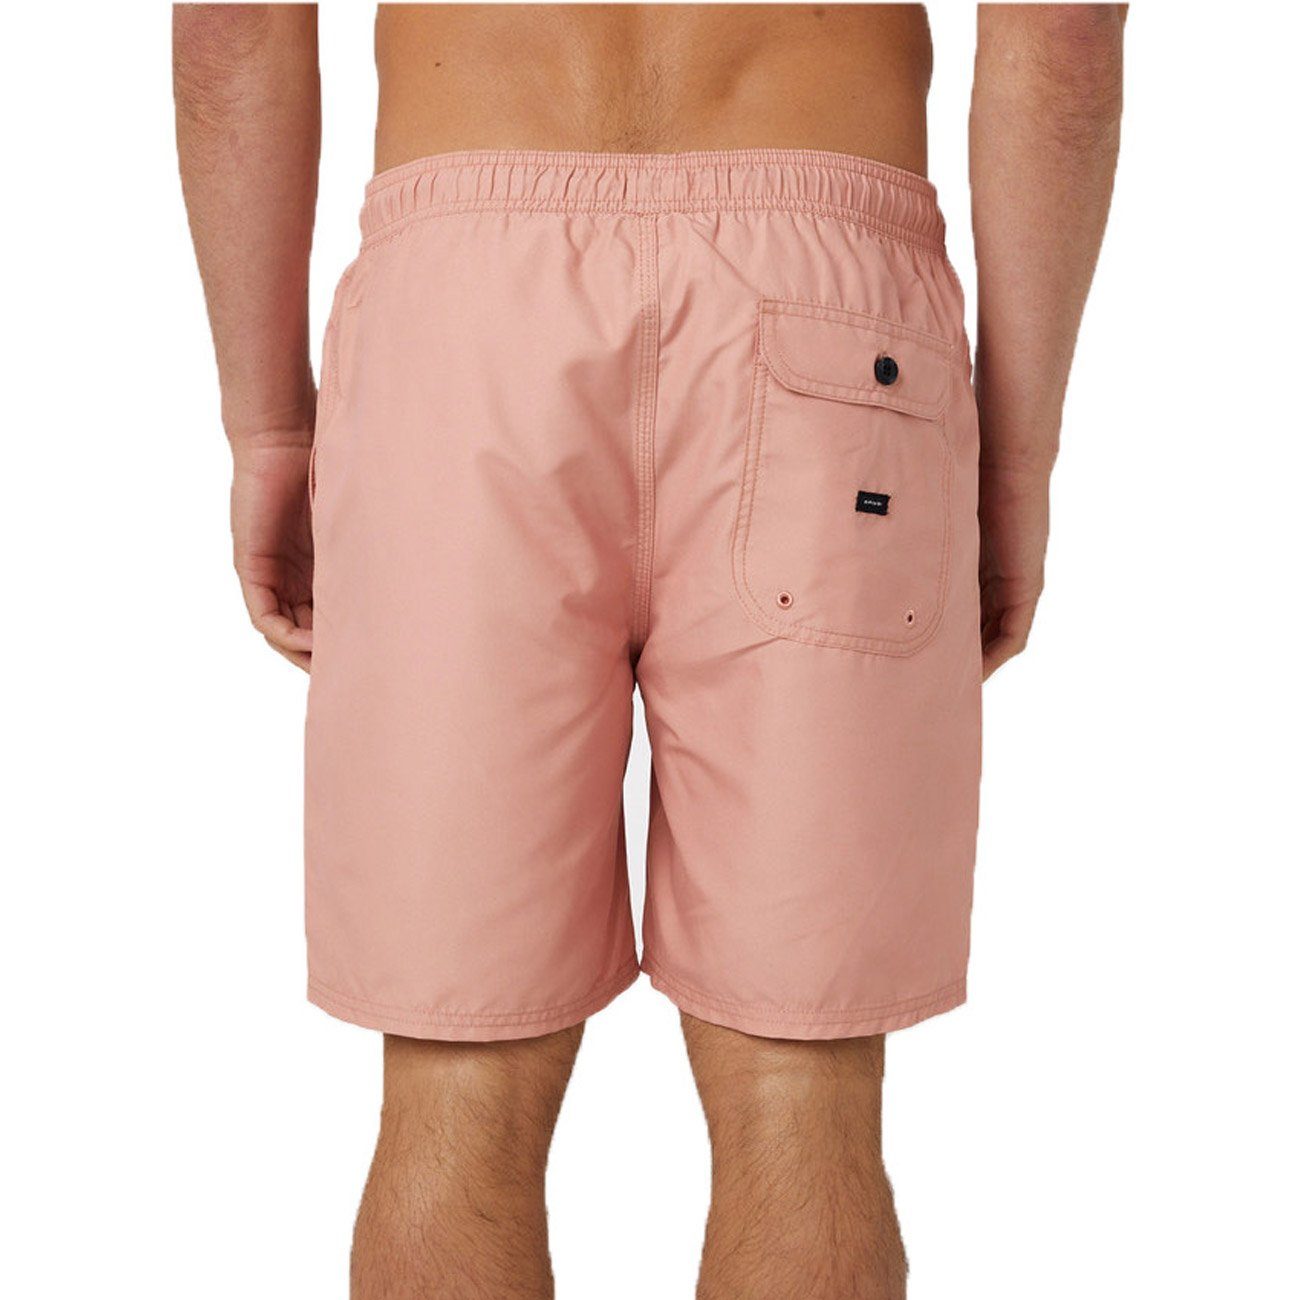 Rip Curl Badeshorts EASY LIVING rose dusty VOLLEY